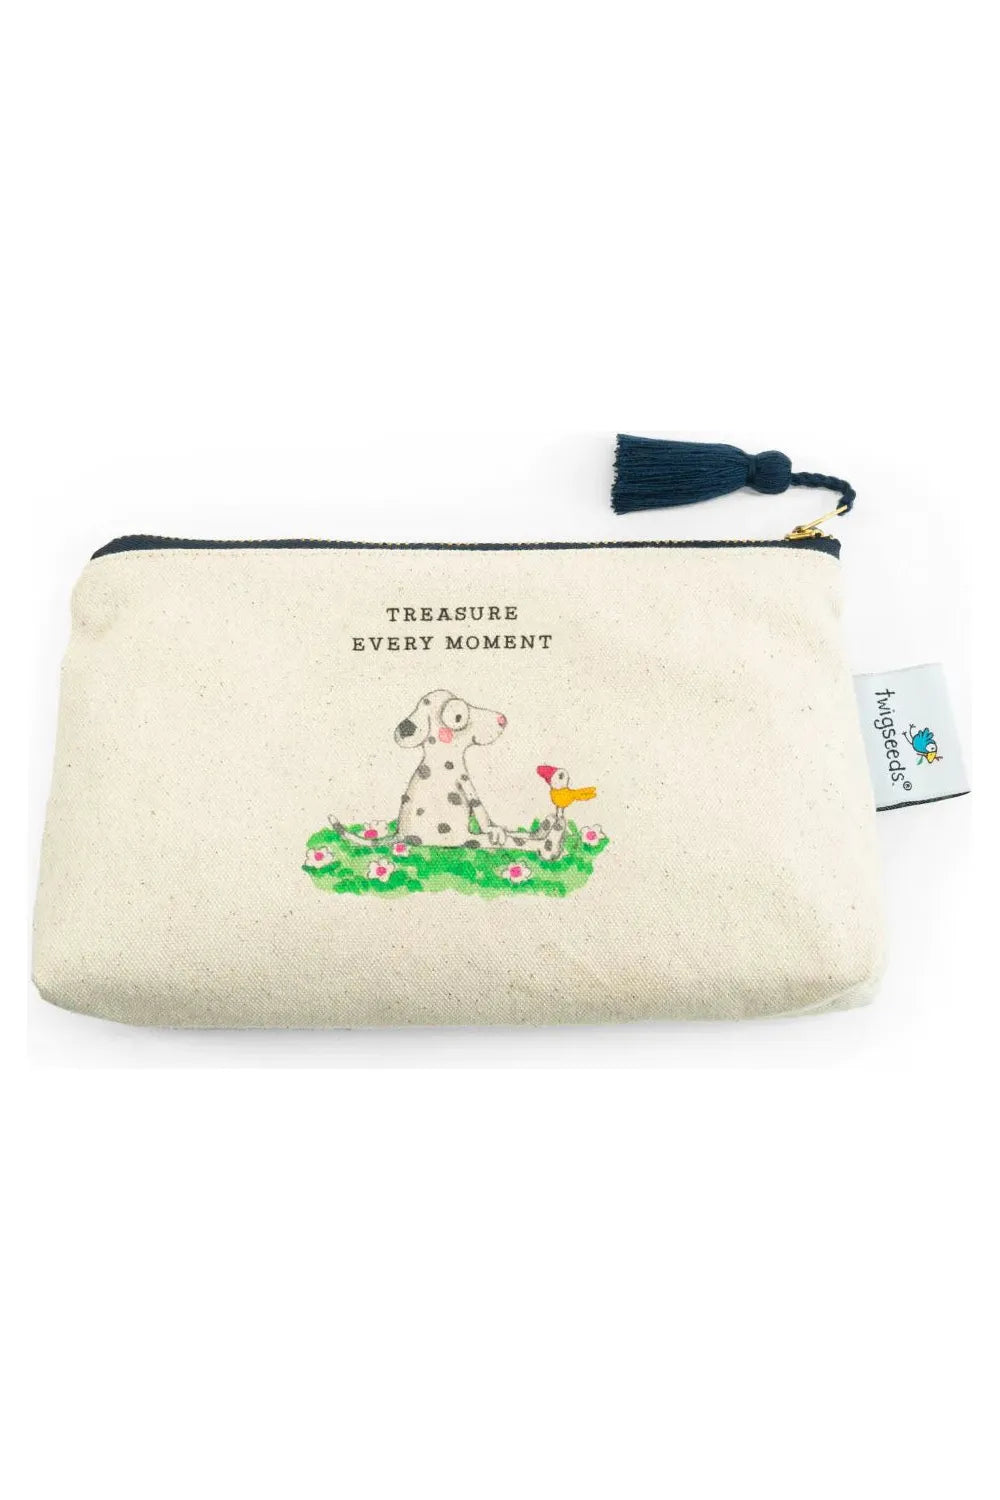 Twigseeds Pouch - Treasure Every Moment